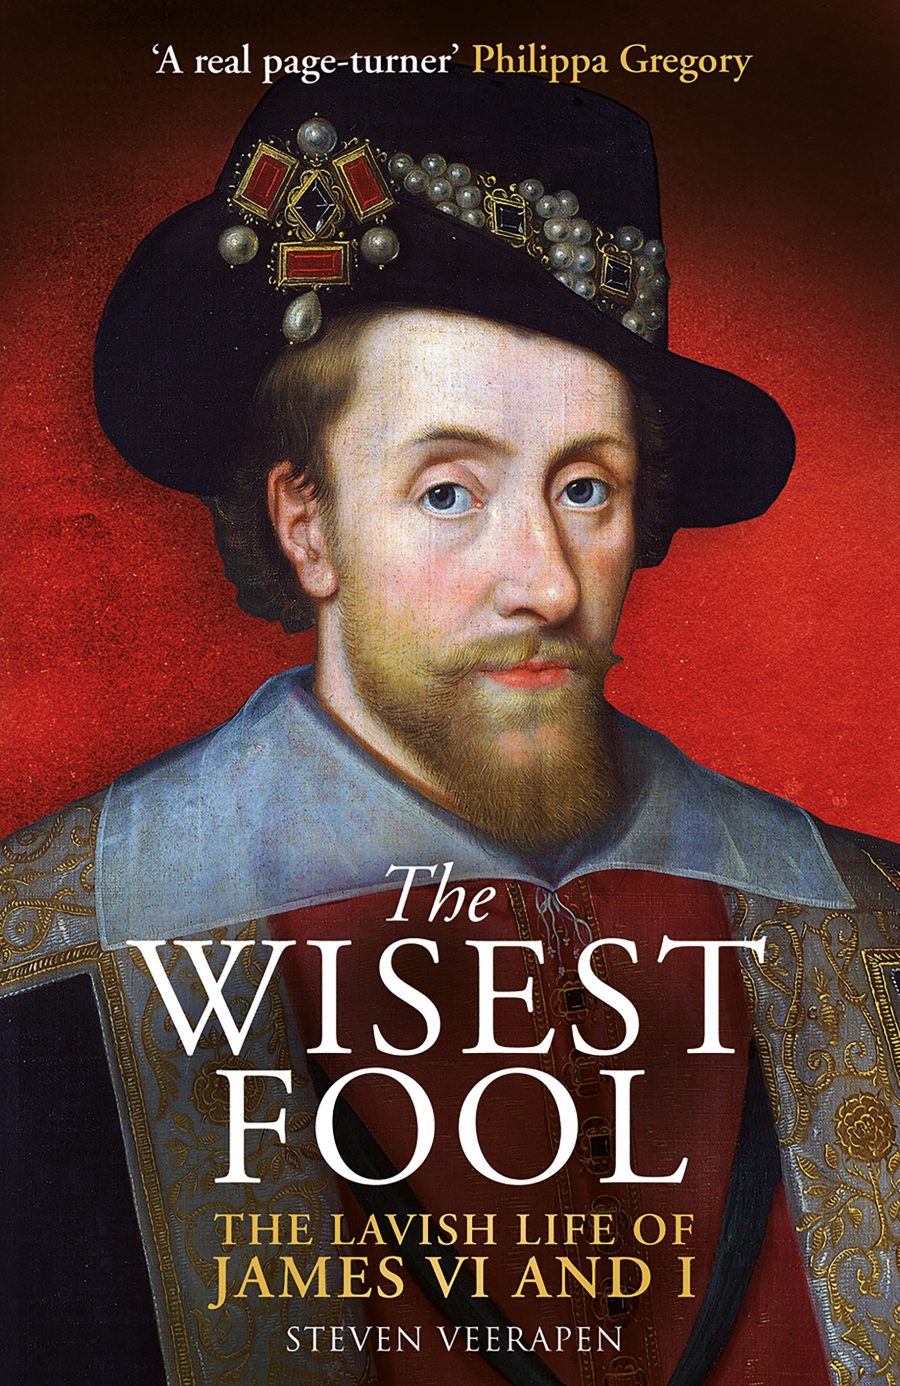 Book cover for 'The Wisest Fool' by Steven Veerapin.